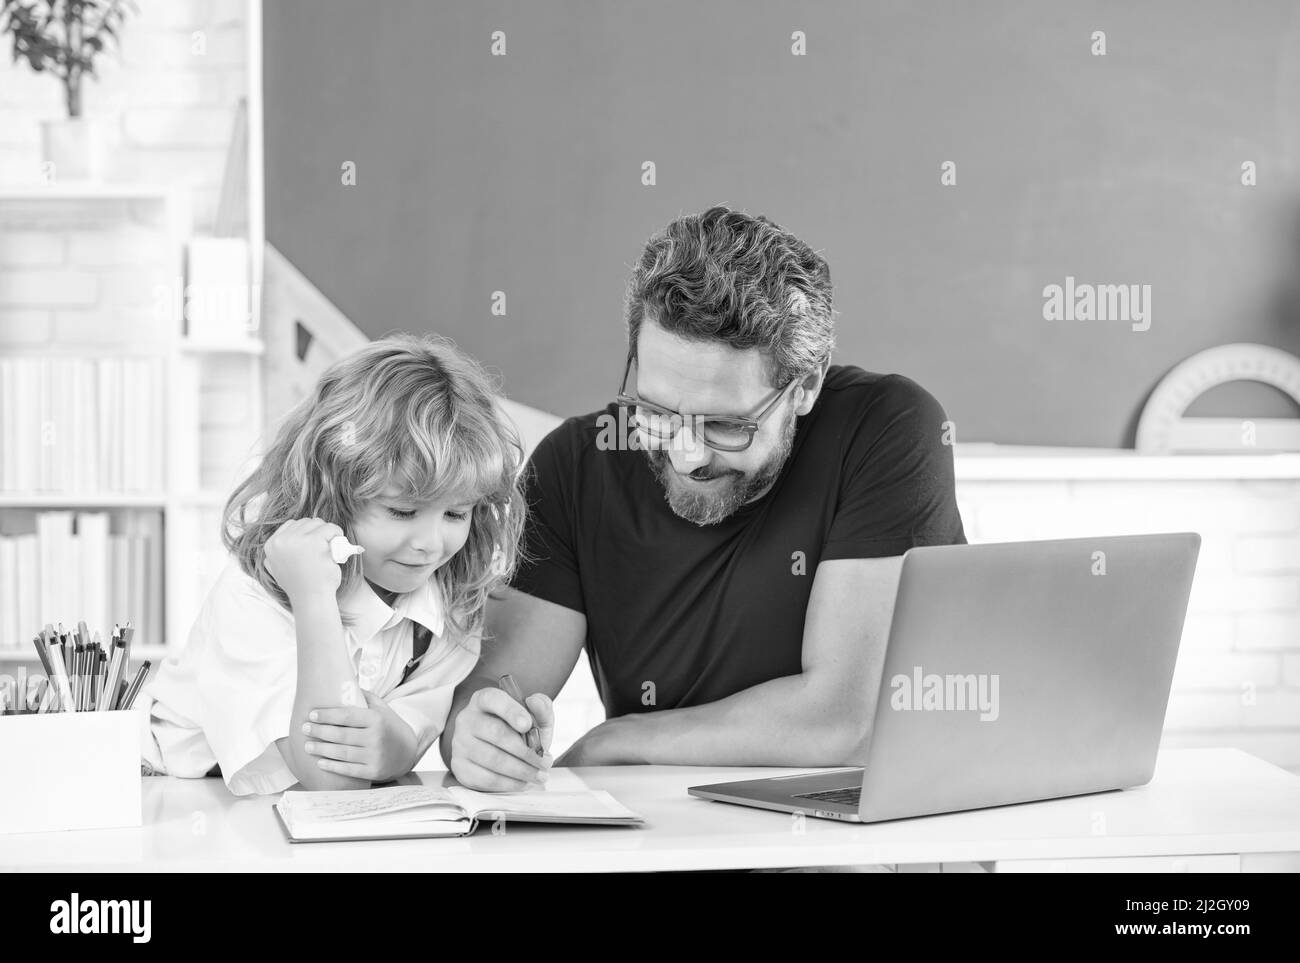 Do homework or play games. Watching video lessons. Online school. Online  schooling. Distant education. Pupil study digital technology. Educative  content. Schoolgirl surfing internet. Online course Stock Photo - Alamy